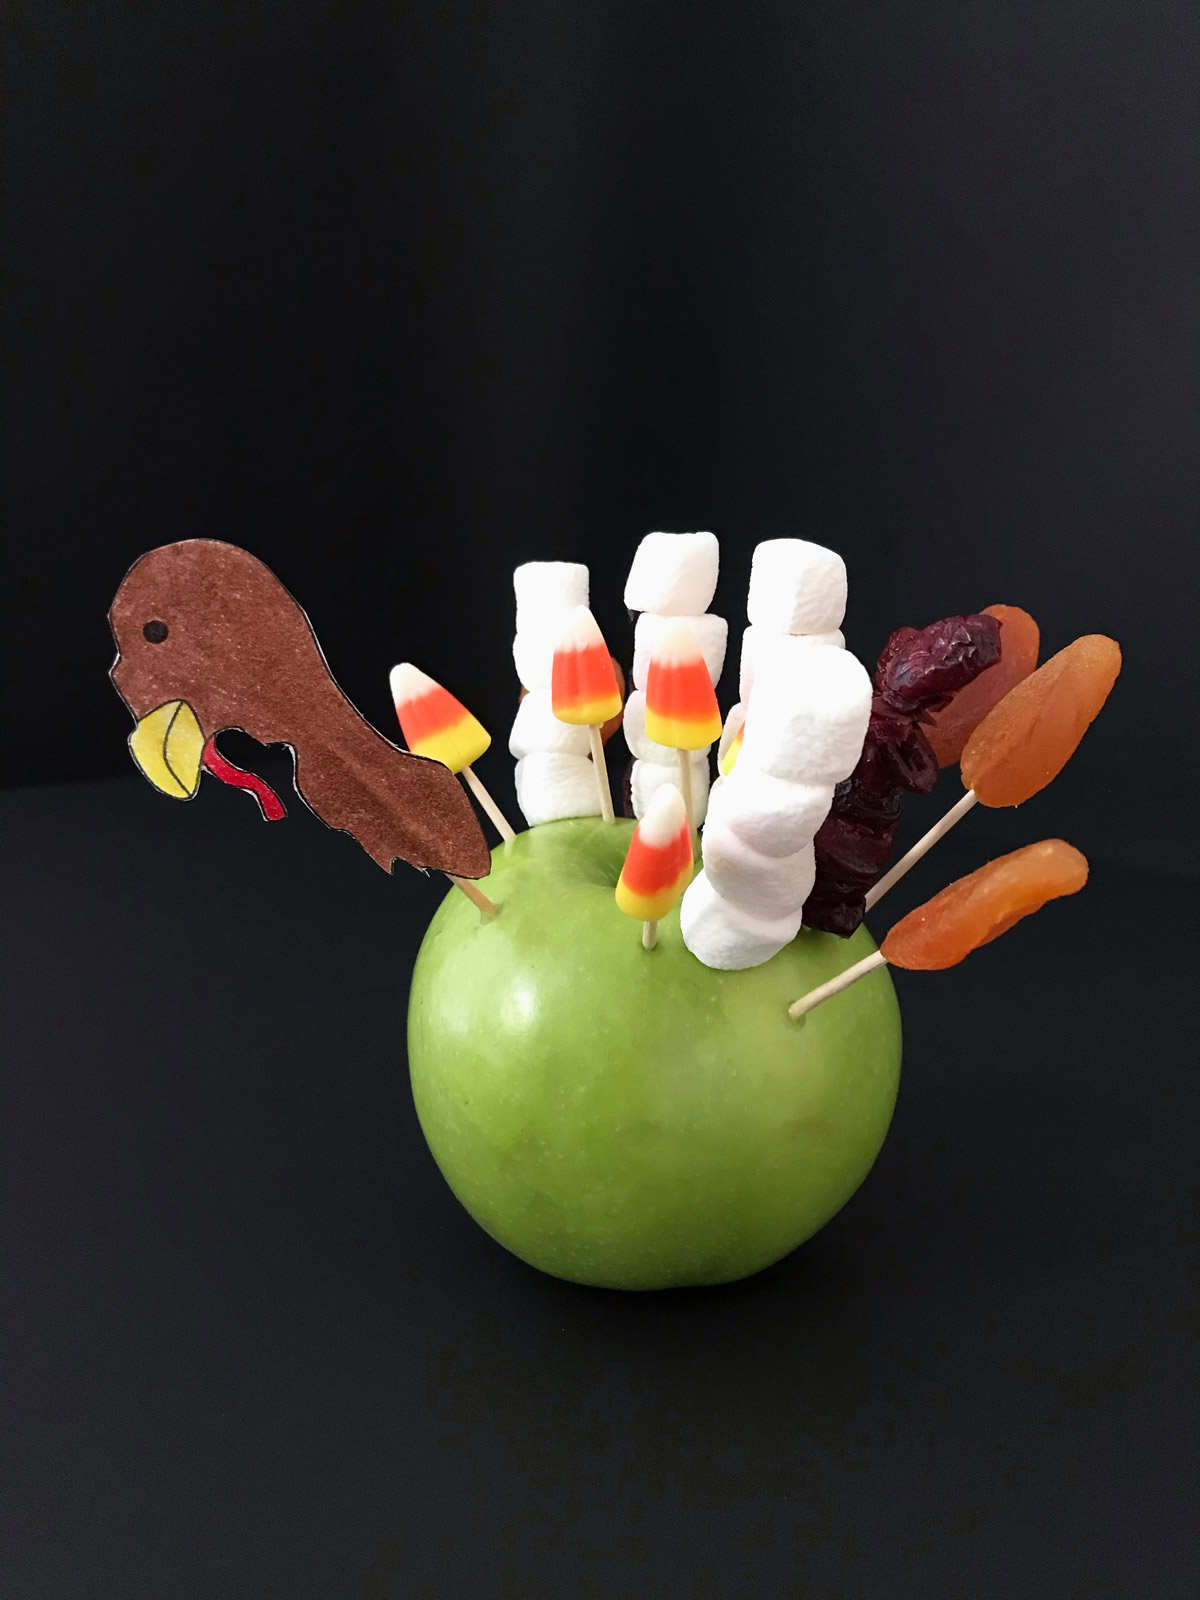 apple resembling a turkey with toothpicks of dried fruit, candy corn, marshmallows, and a paper cut out head.